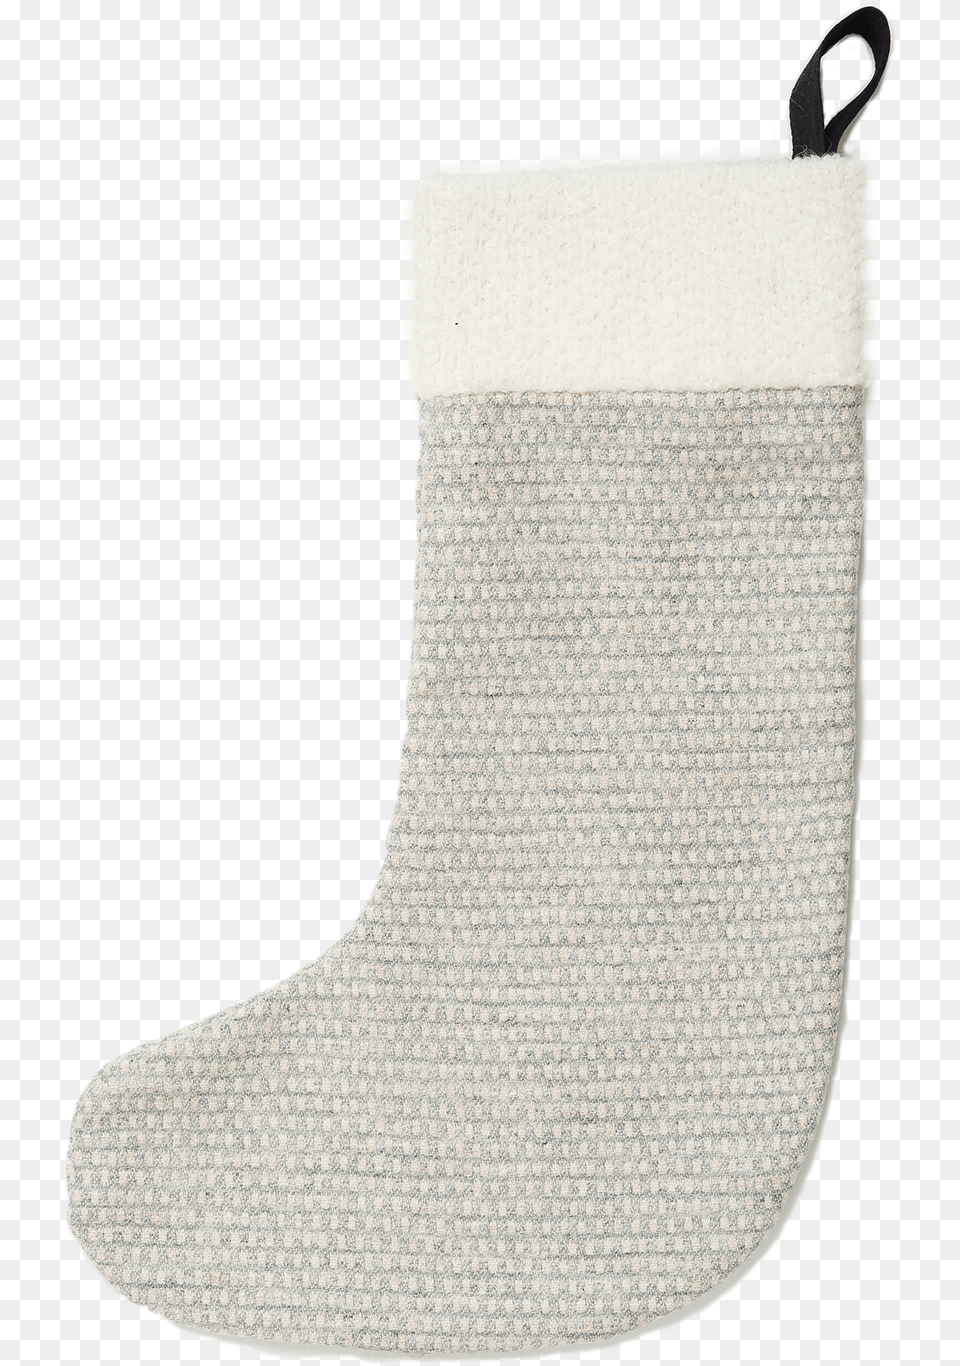 Lambswool Christmas Stocking Image With No Sock, Hosiery, Clothing, Christmas Decorations, Festival Png